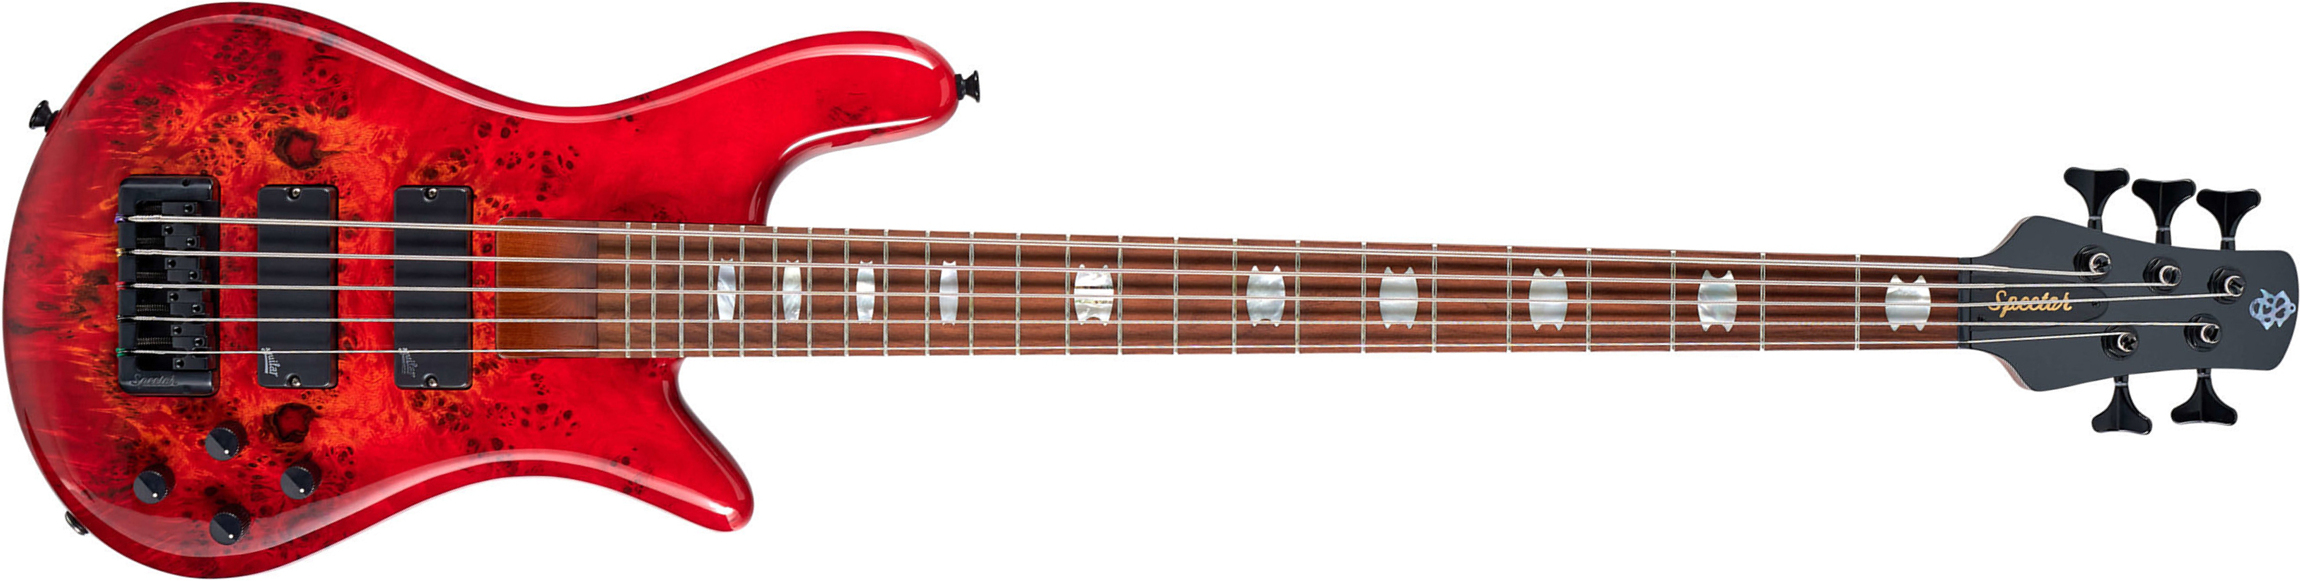 Spector Ns Eurobolt 5c Active Aguilar Mn - Inferno Red Gloss - Solid body electric bass - Main picture